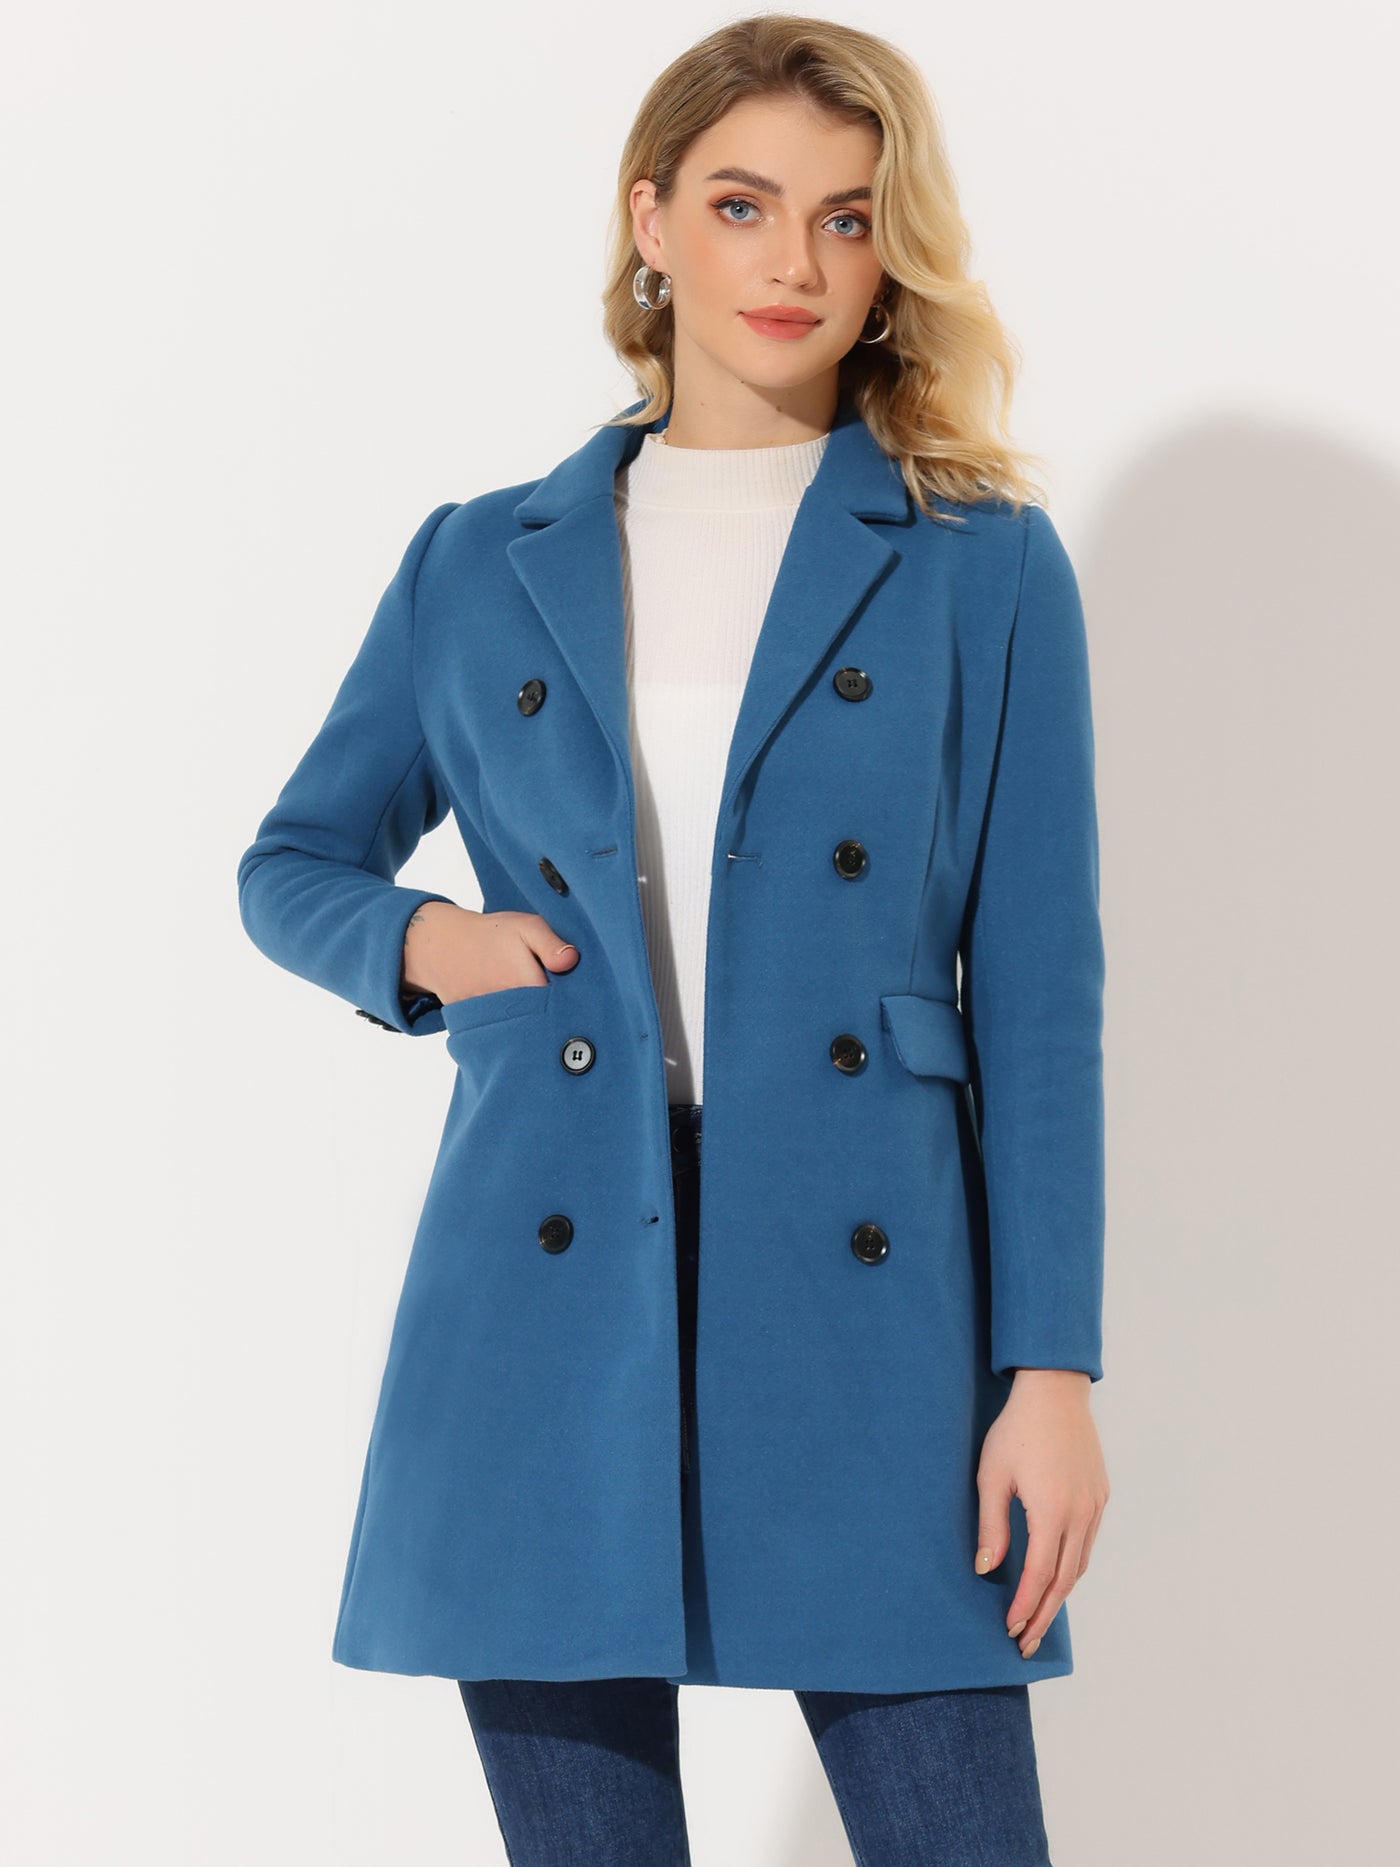 Allegra K Winter Elegant Notched Lapel Double Breasted Trench Coat